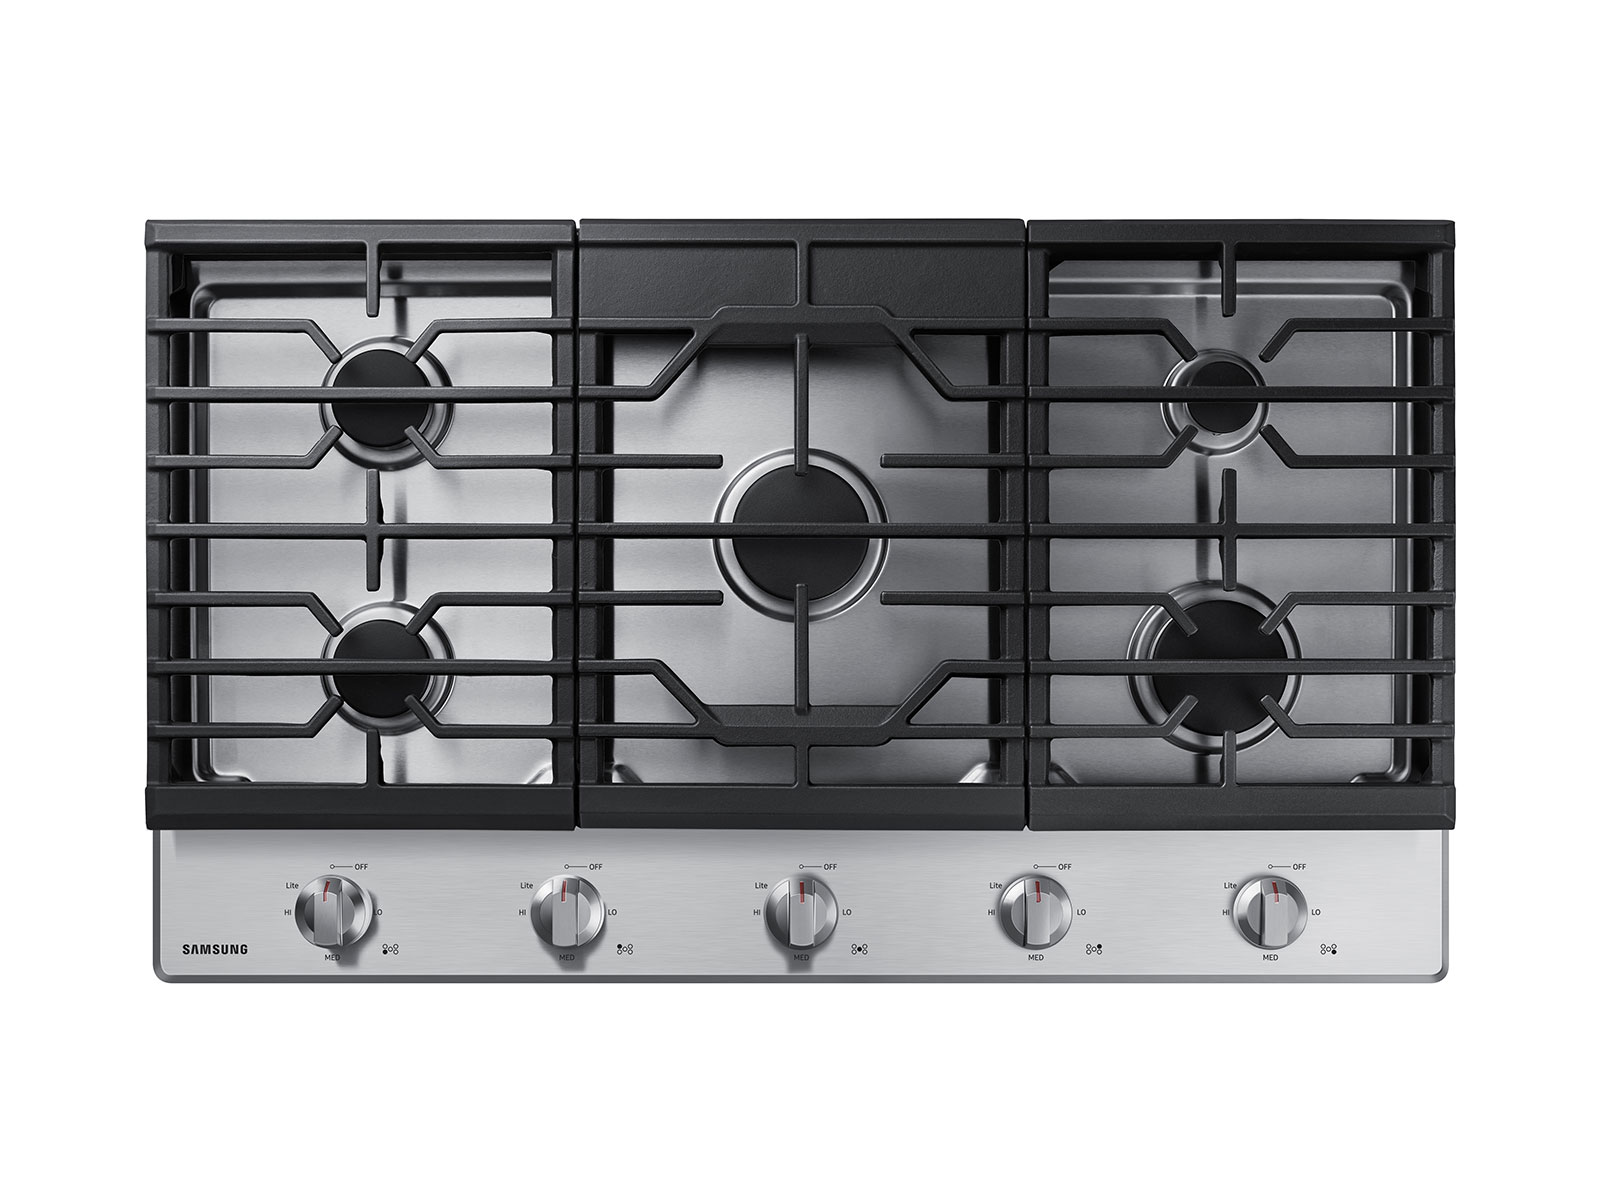 Samsung 36" Gas Cooktop in Stainless Steel(NA36R5310FS/AA)